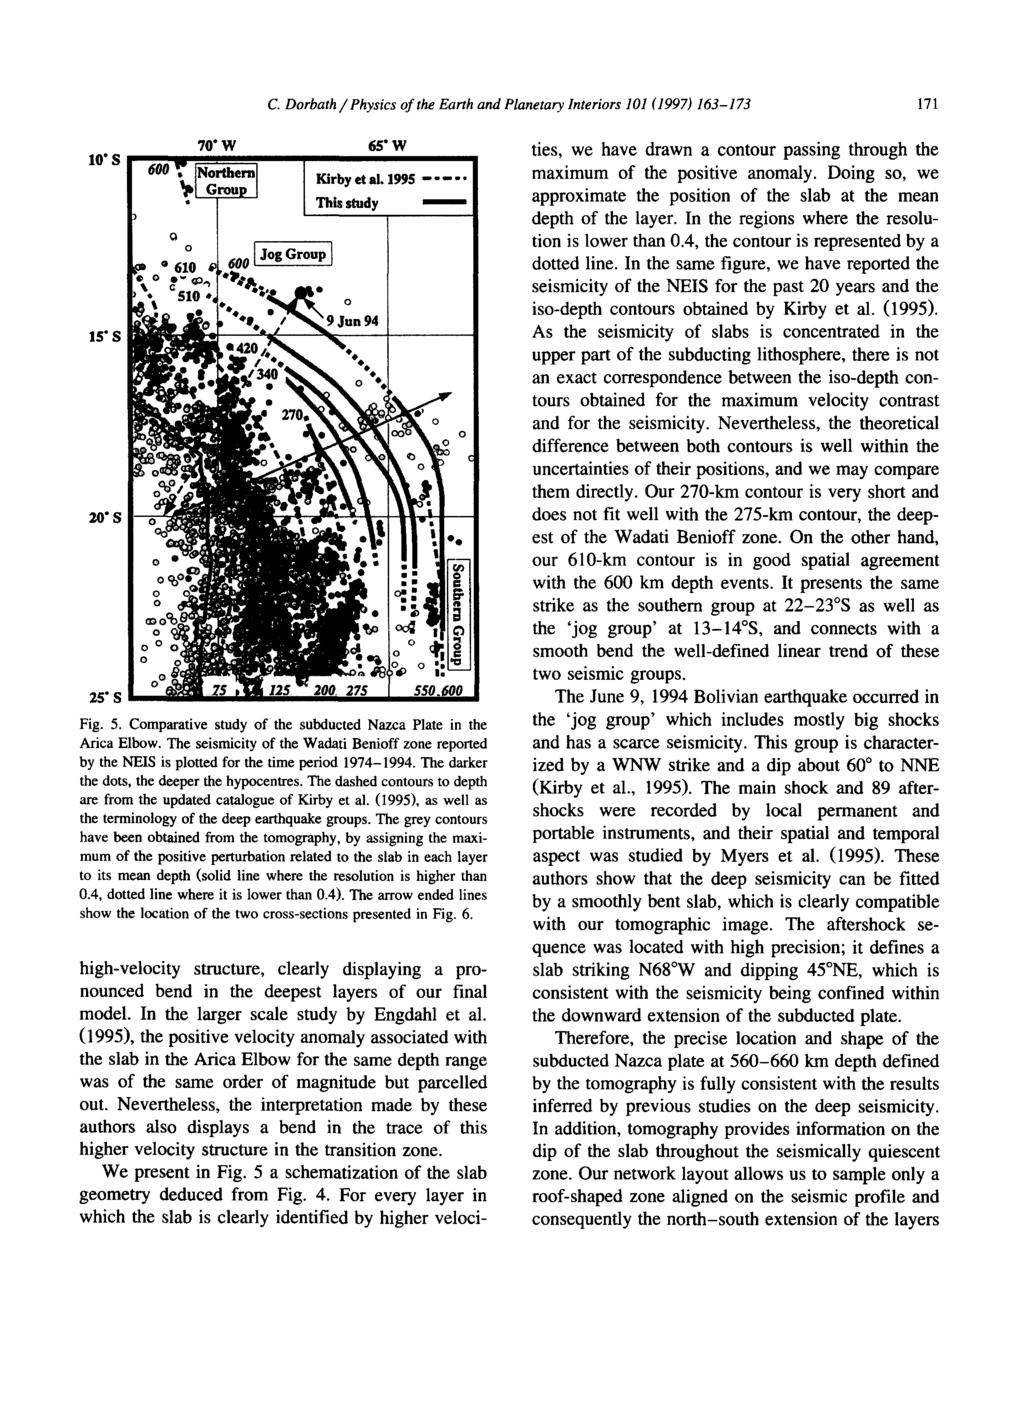 C. Dorbath / Physics of the Earth and Planetary Interiors 101 (1997) 163-173 171 10" S 15" $ 20"$ 2S" $ 70"W 65"W Fig. 5. Comparative study of the subducted Nazca Plate in the Arica Elbow.